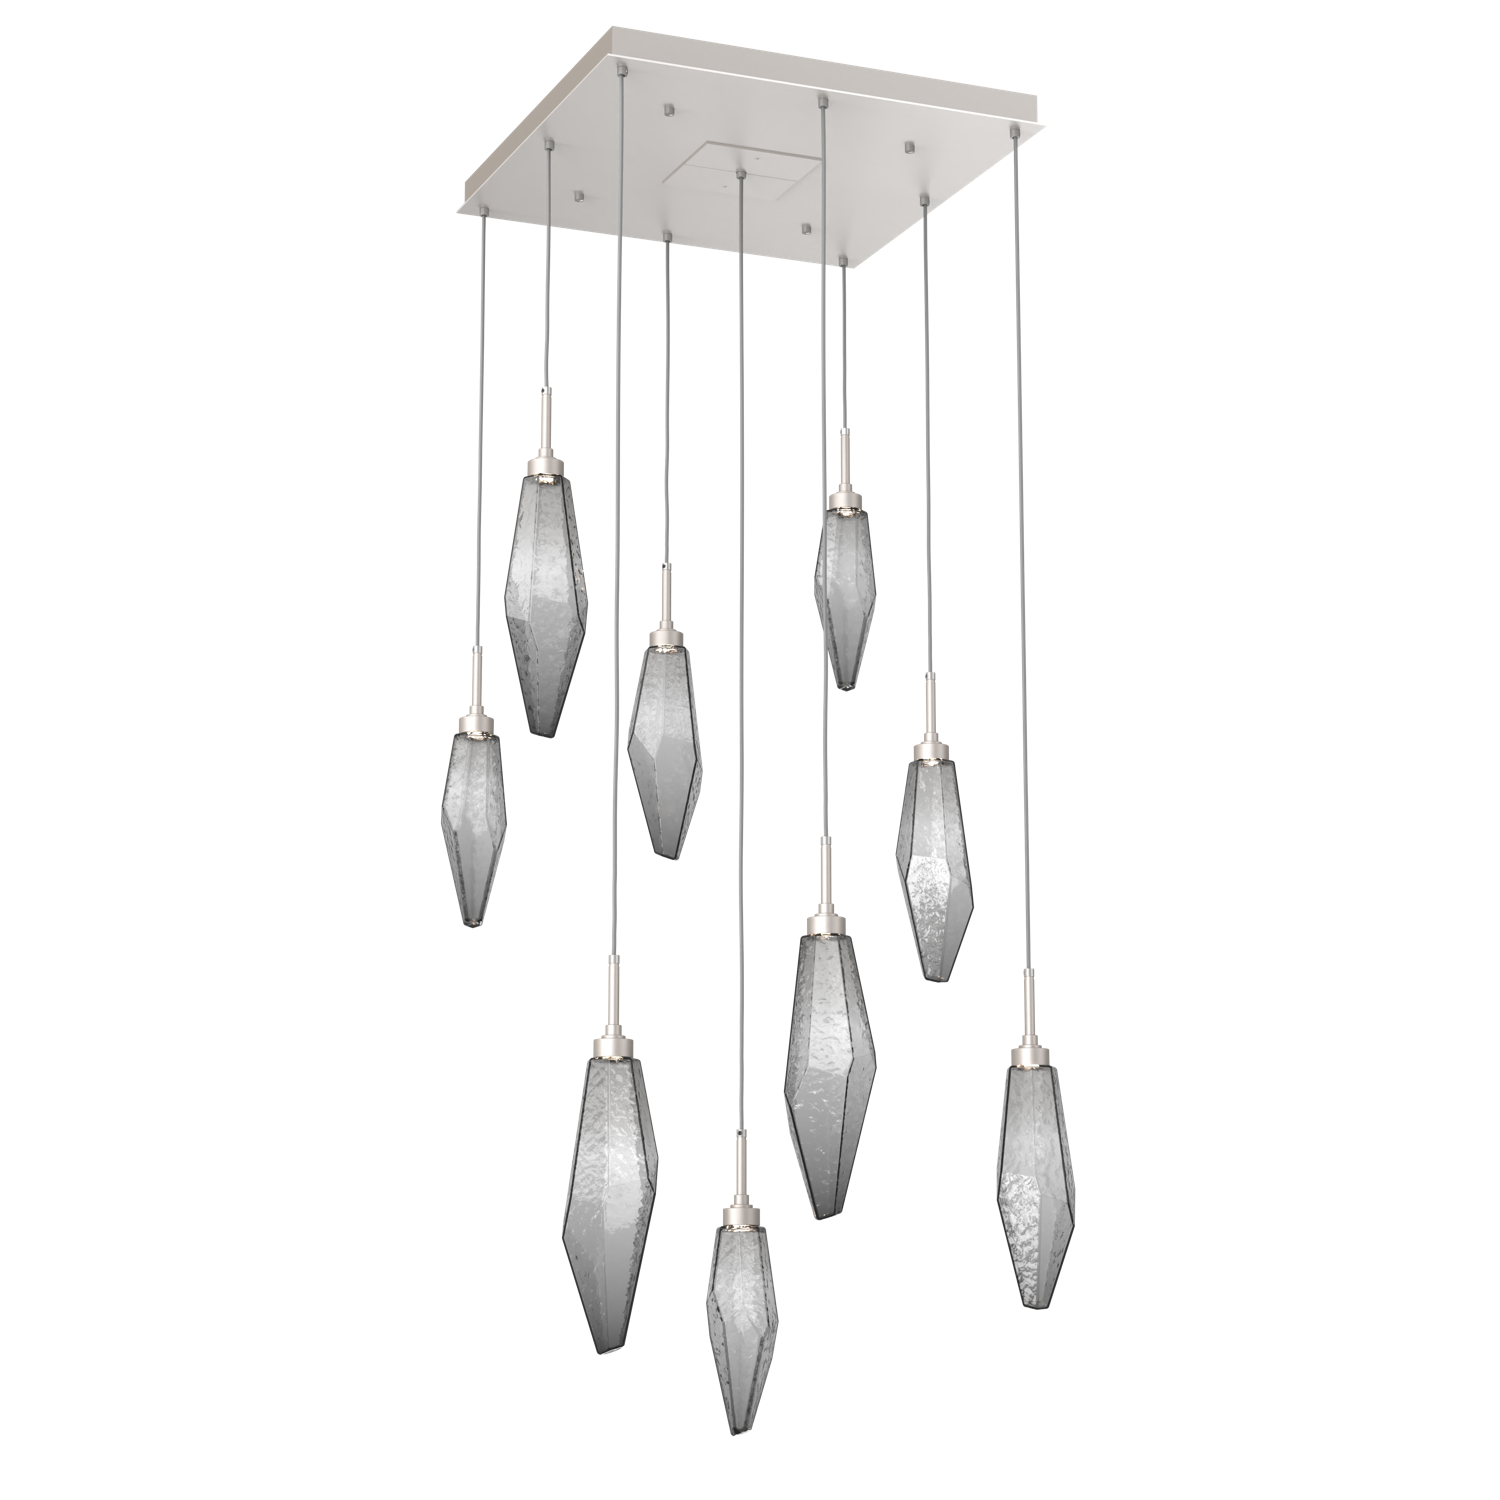 CHB0050-09-BS-CS-Hammerton-Studio-Rock-Crystal-9-light-square-pendant-chandelier-with-beige-silver-finish-and-chilled-smoke-glass-shades-and-LED-lamping